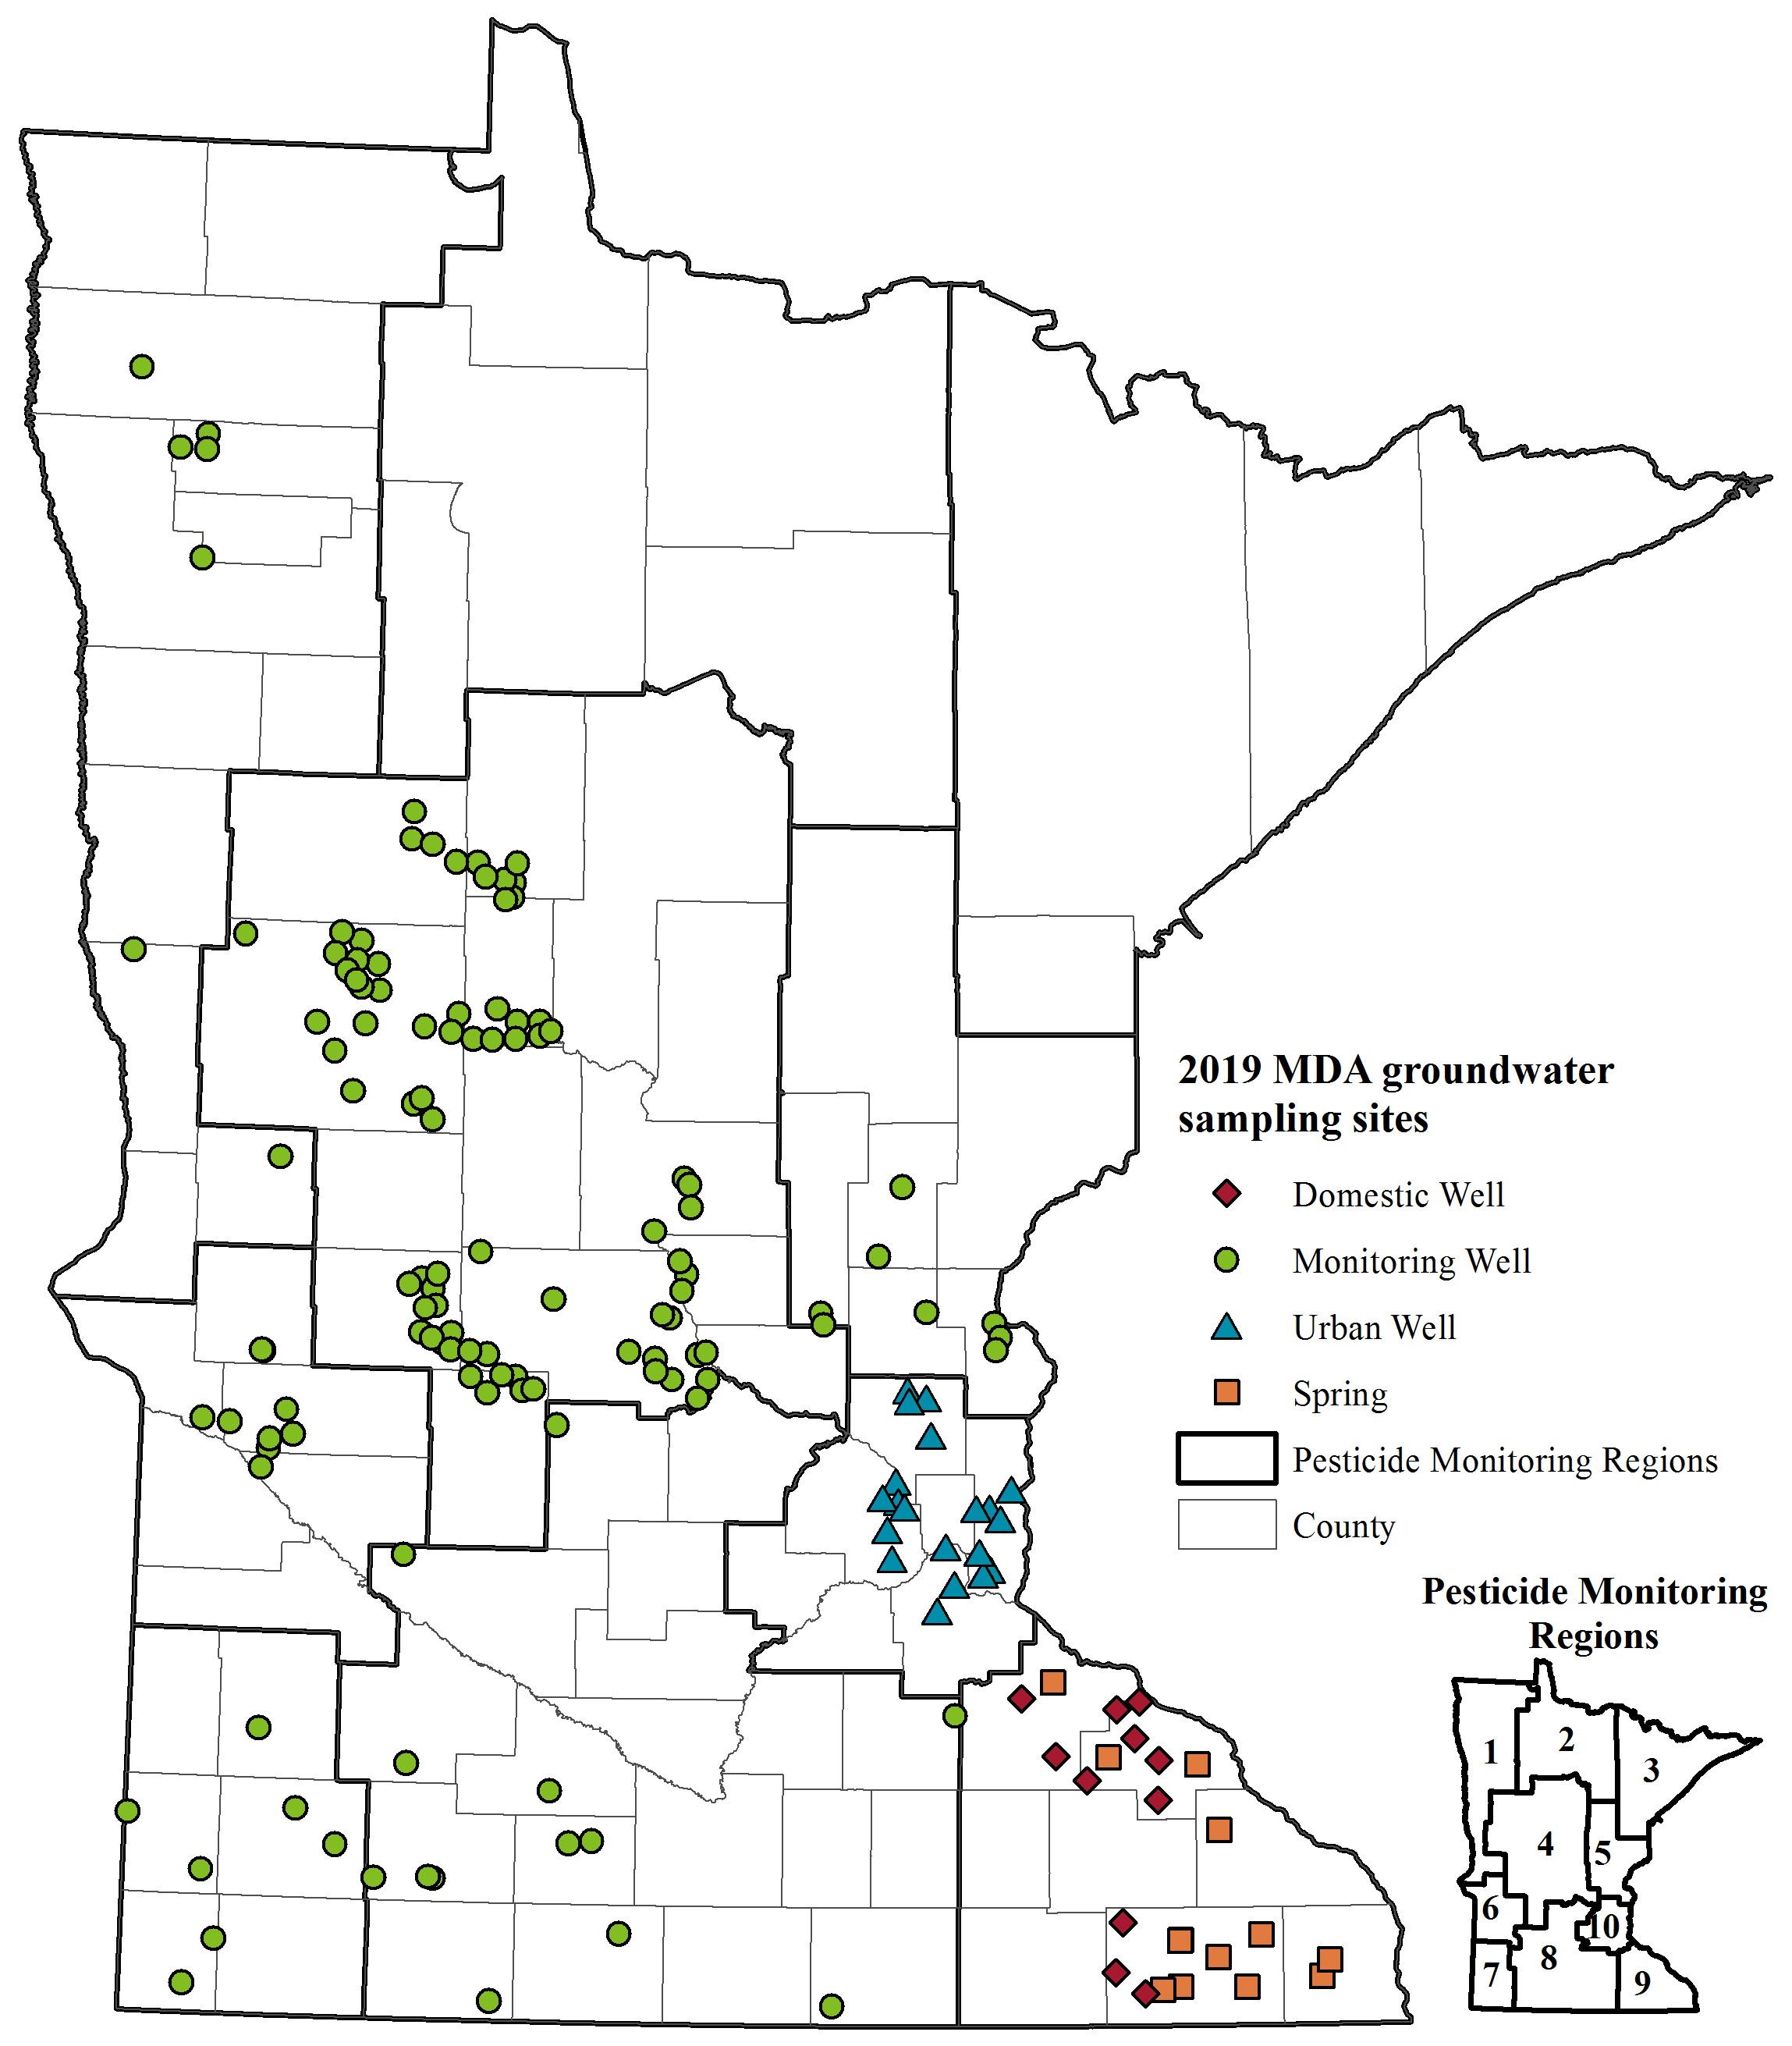 Map illustrating the location of the groundwater sampling sites in 2019. Sampling sites include domestic wells, monitoring wells, urban wells, and springs.